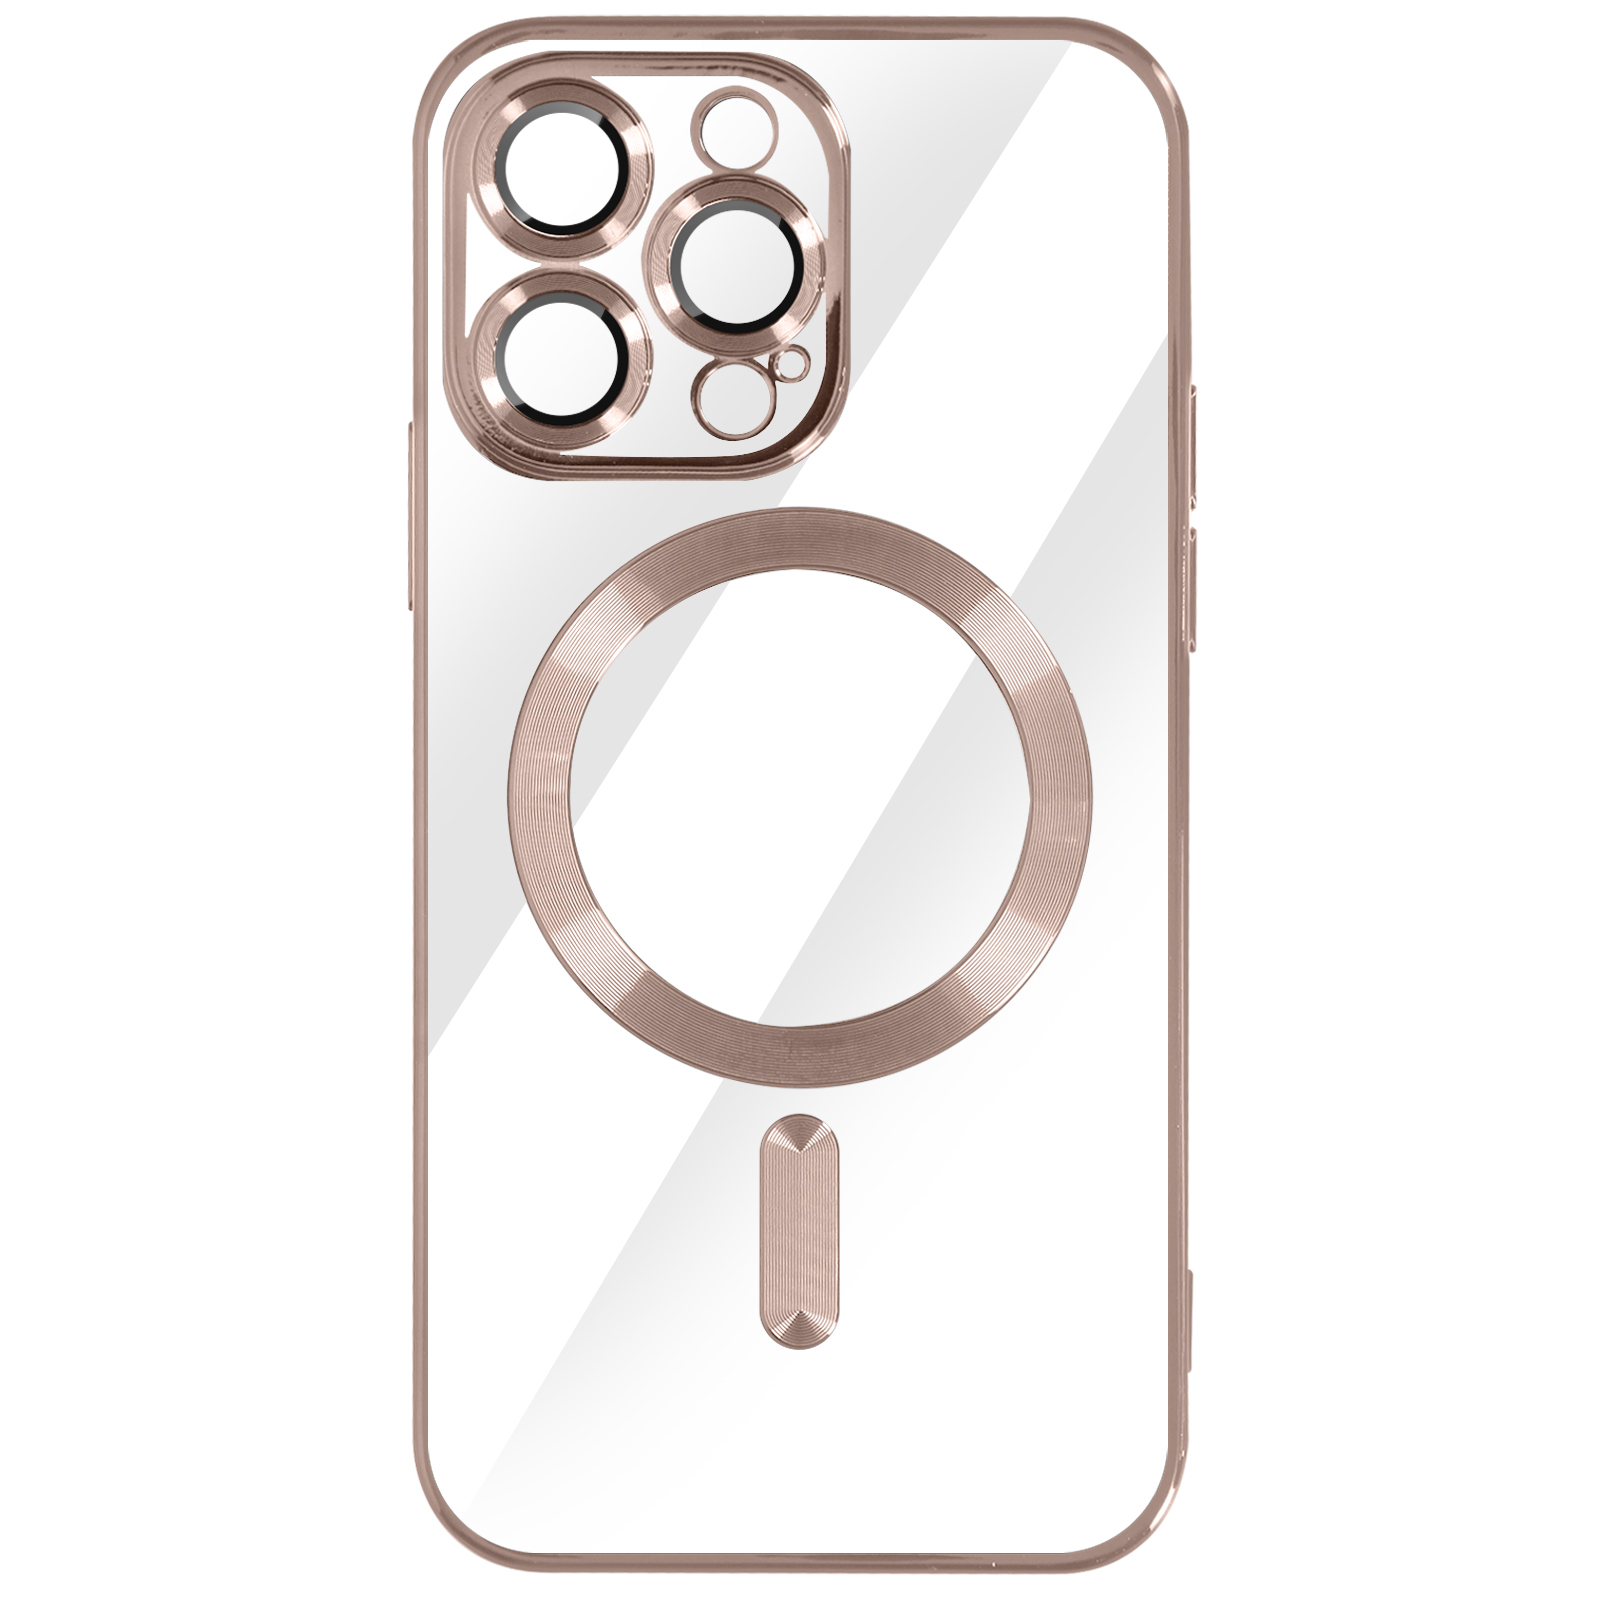 Pro 14 Apple, Chrom Series, Backcover, AVIZAR Handyhülle Max, iPhone Rosegold